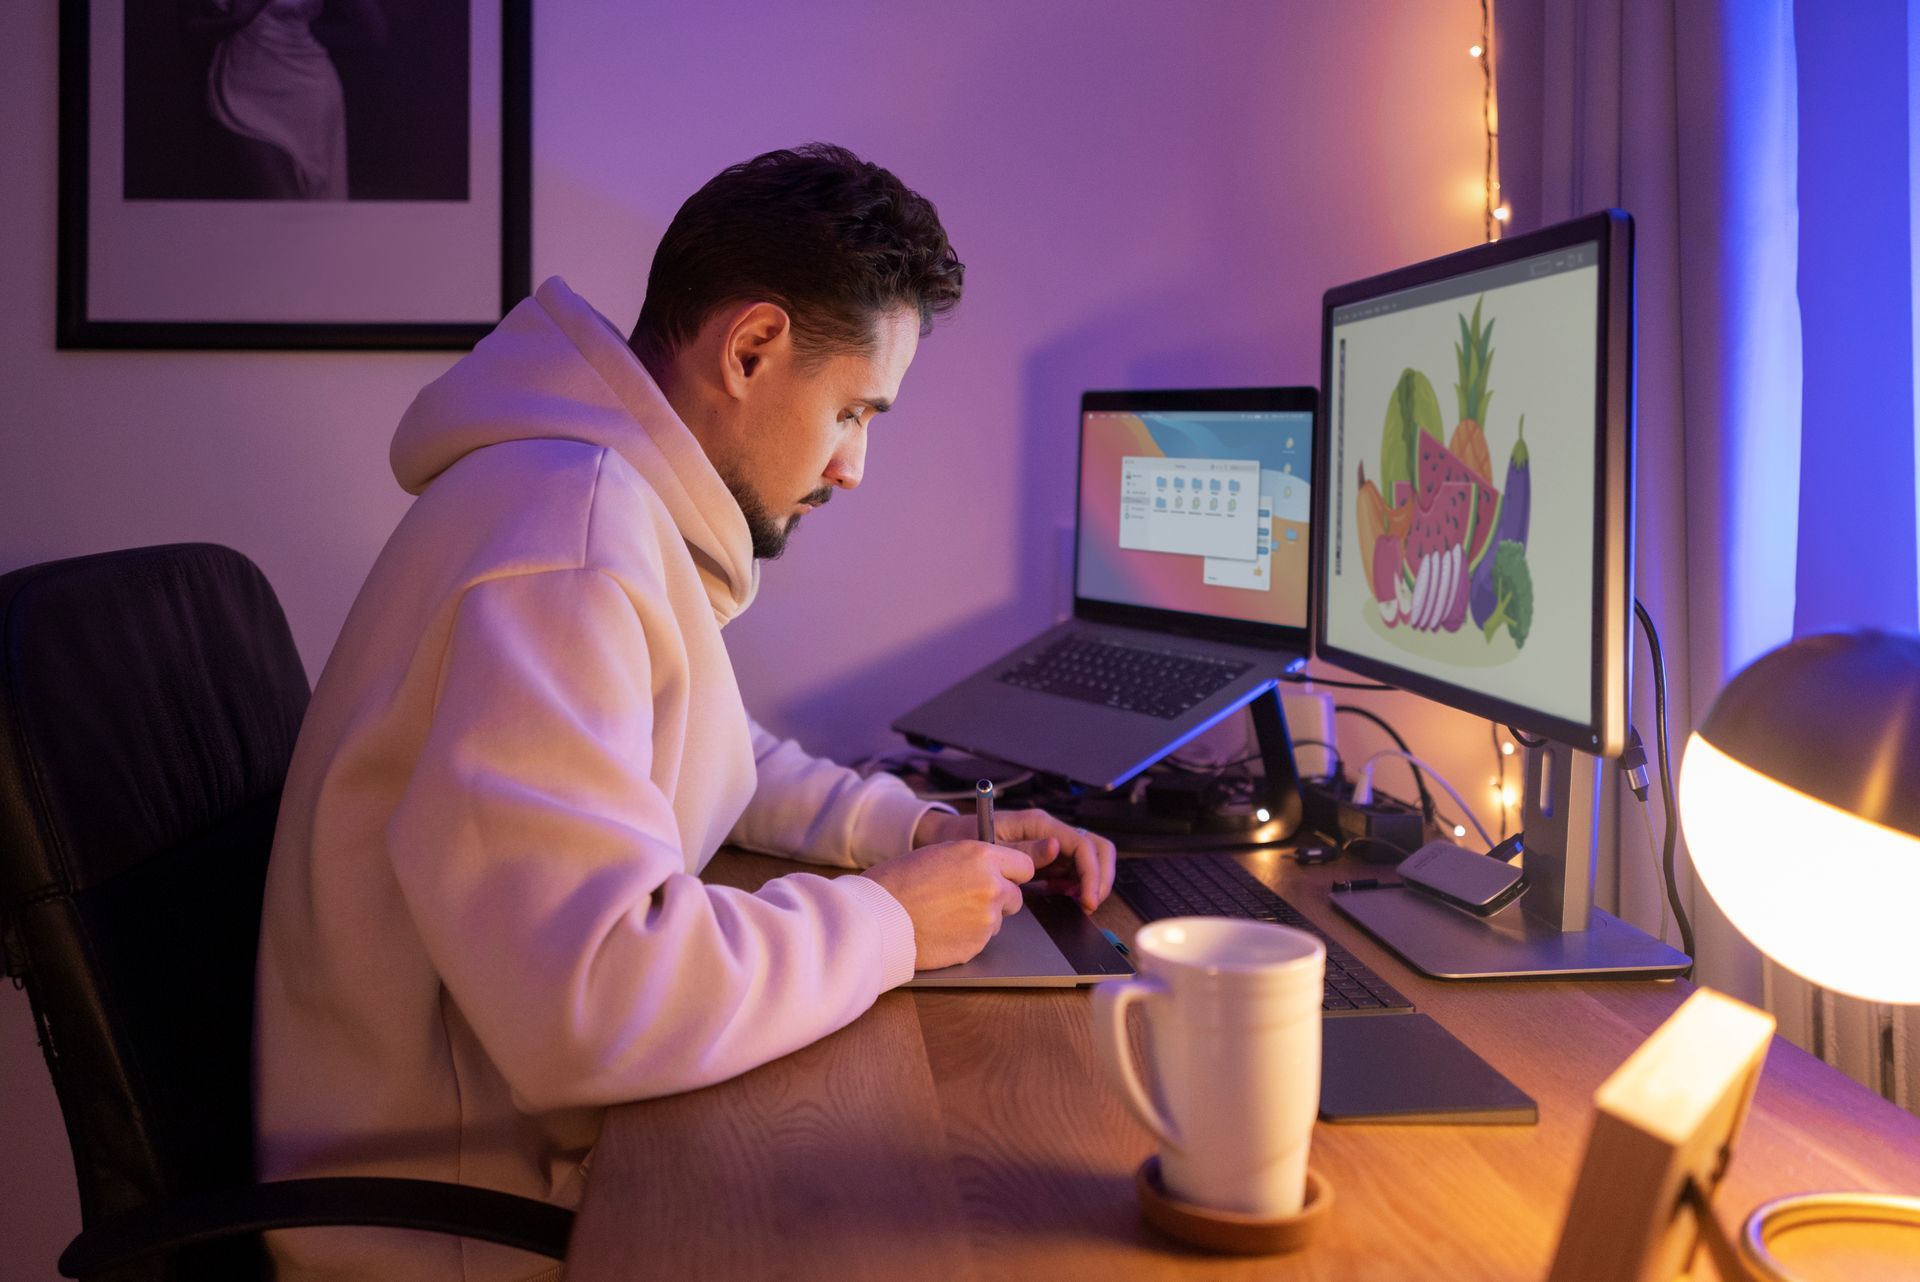 A man is sitting at a desk with a laptop and two computer monitors.